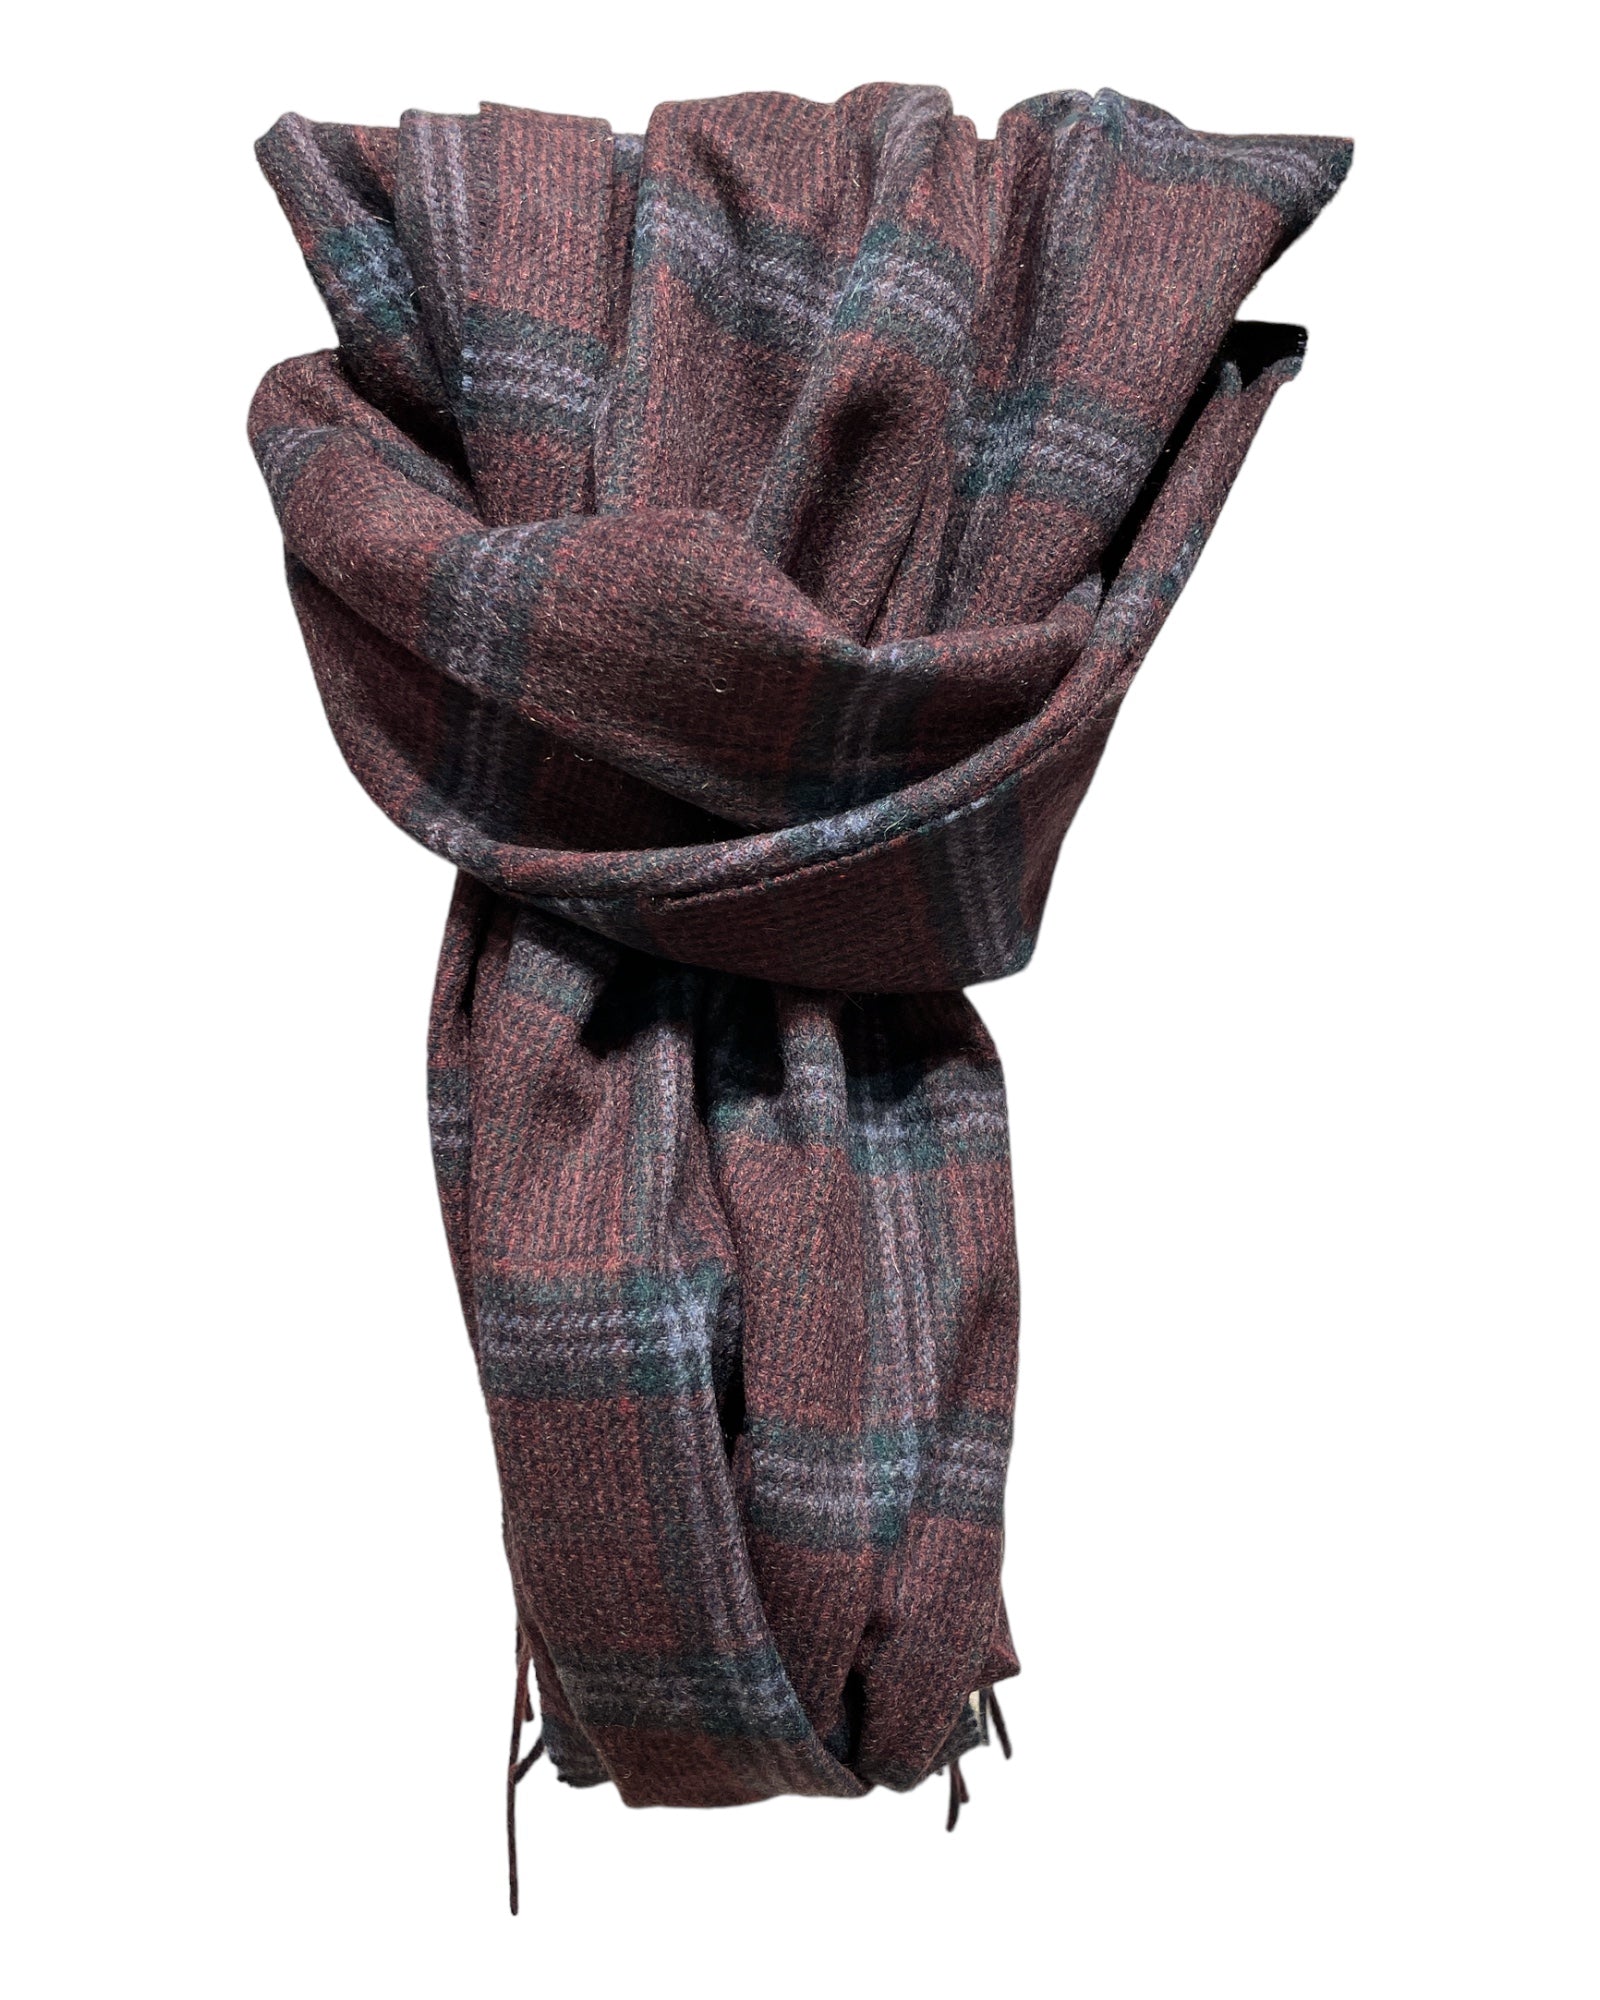 Cashmere Scarf - Wine with Blue & Green Check SCARVES